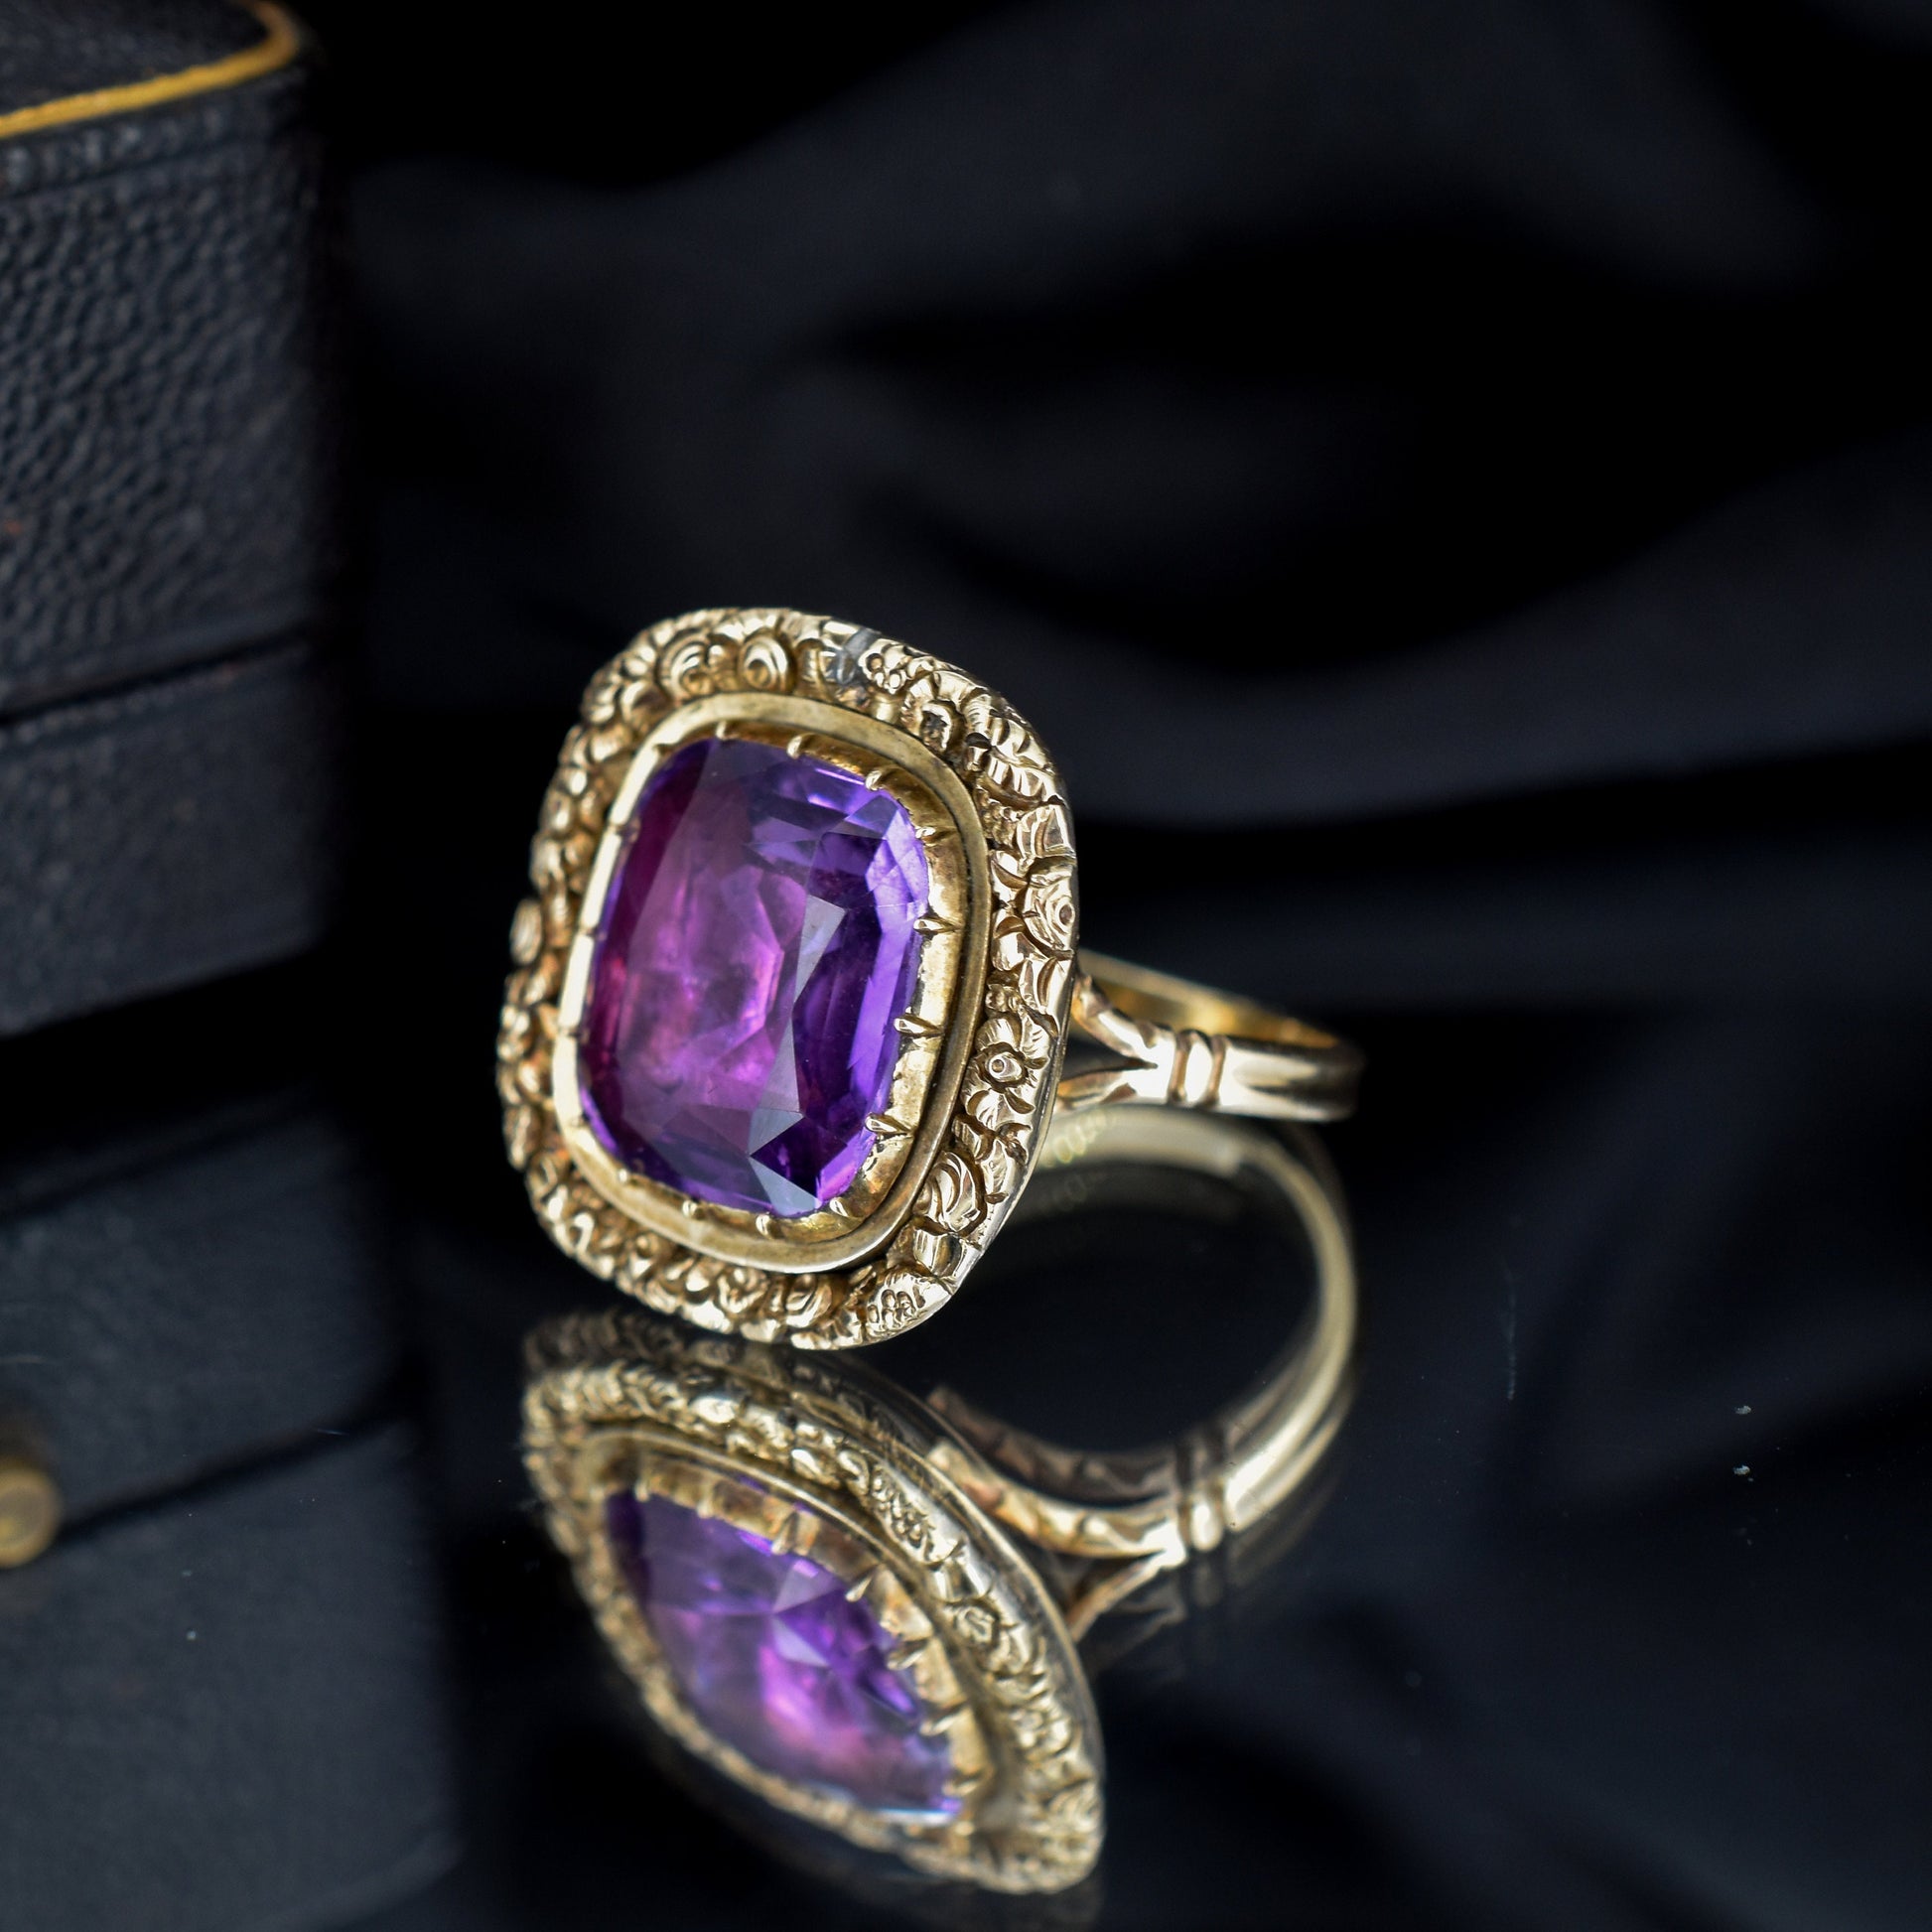 Antique Georgian Amethyst 9ct Gold Foiled Conversion Ring